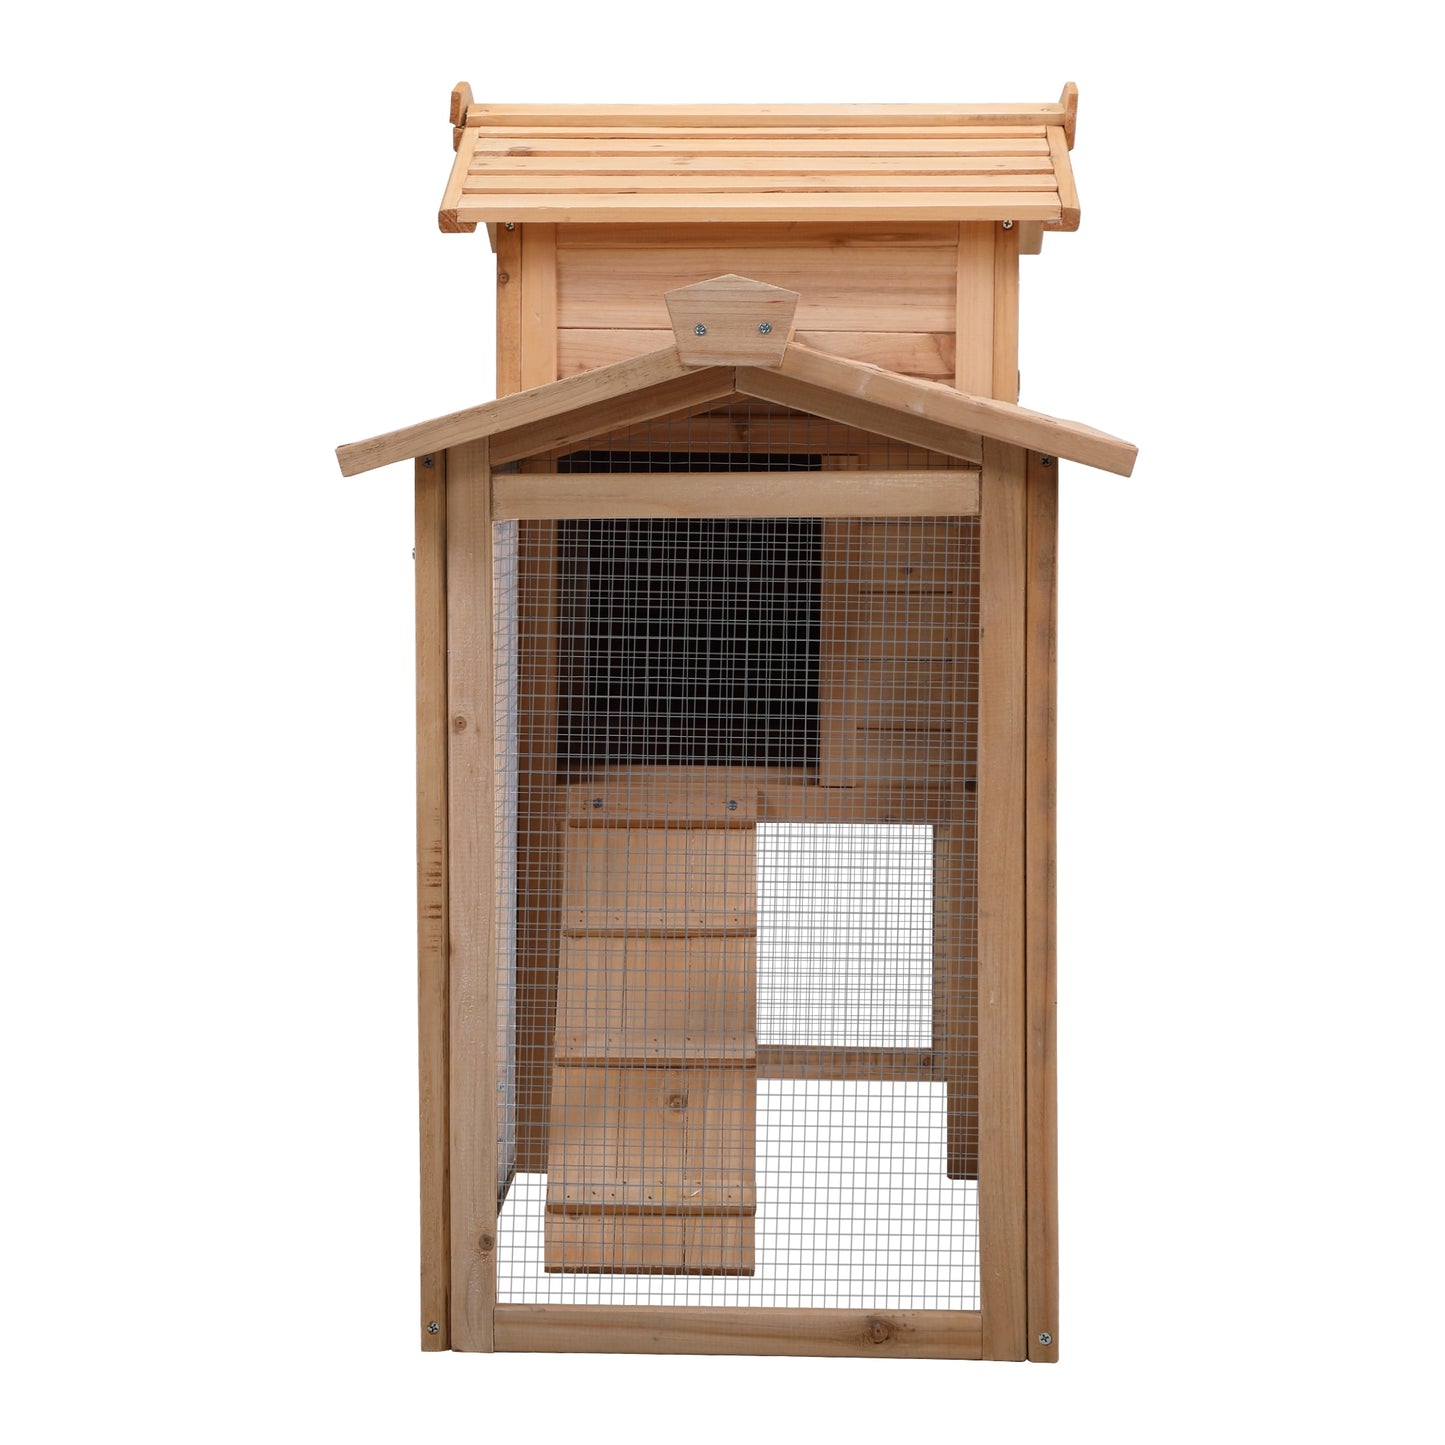 Rabbit Hutch Chicken Coop Outdoor Wooden Pet Bunny House with Ventilation Gridding Fences Openable Door Crib for 2 Rabbits